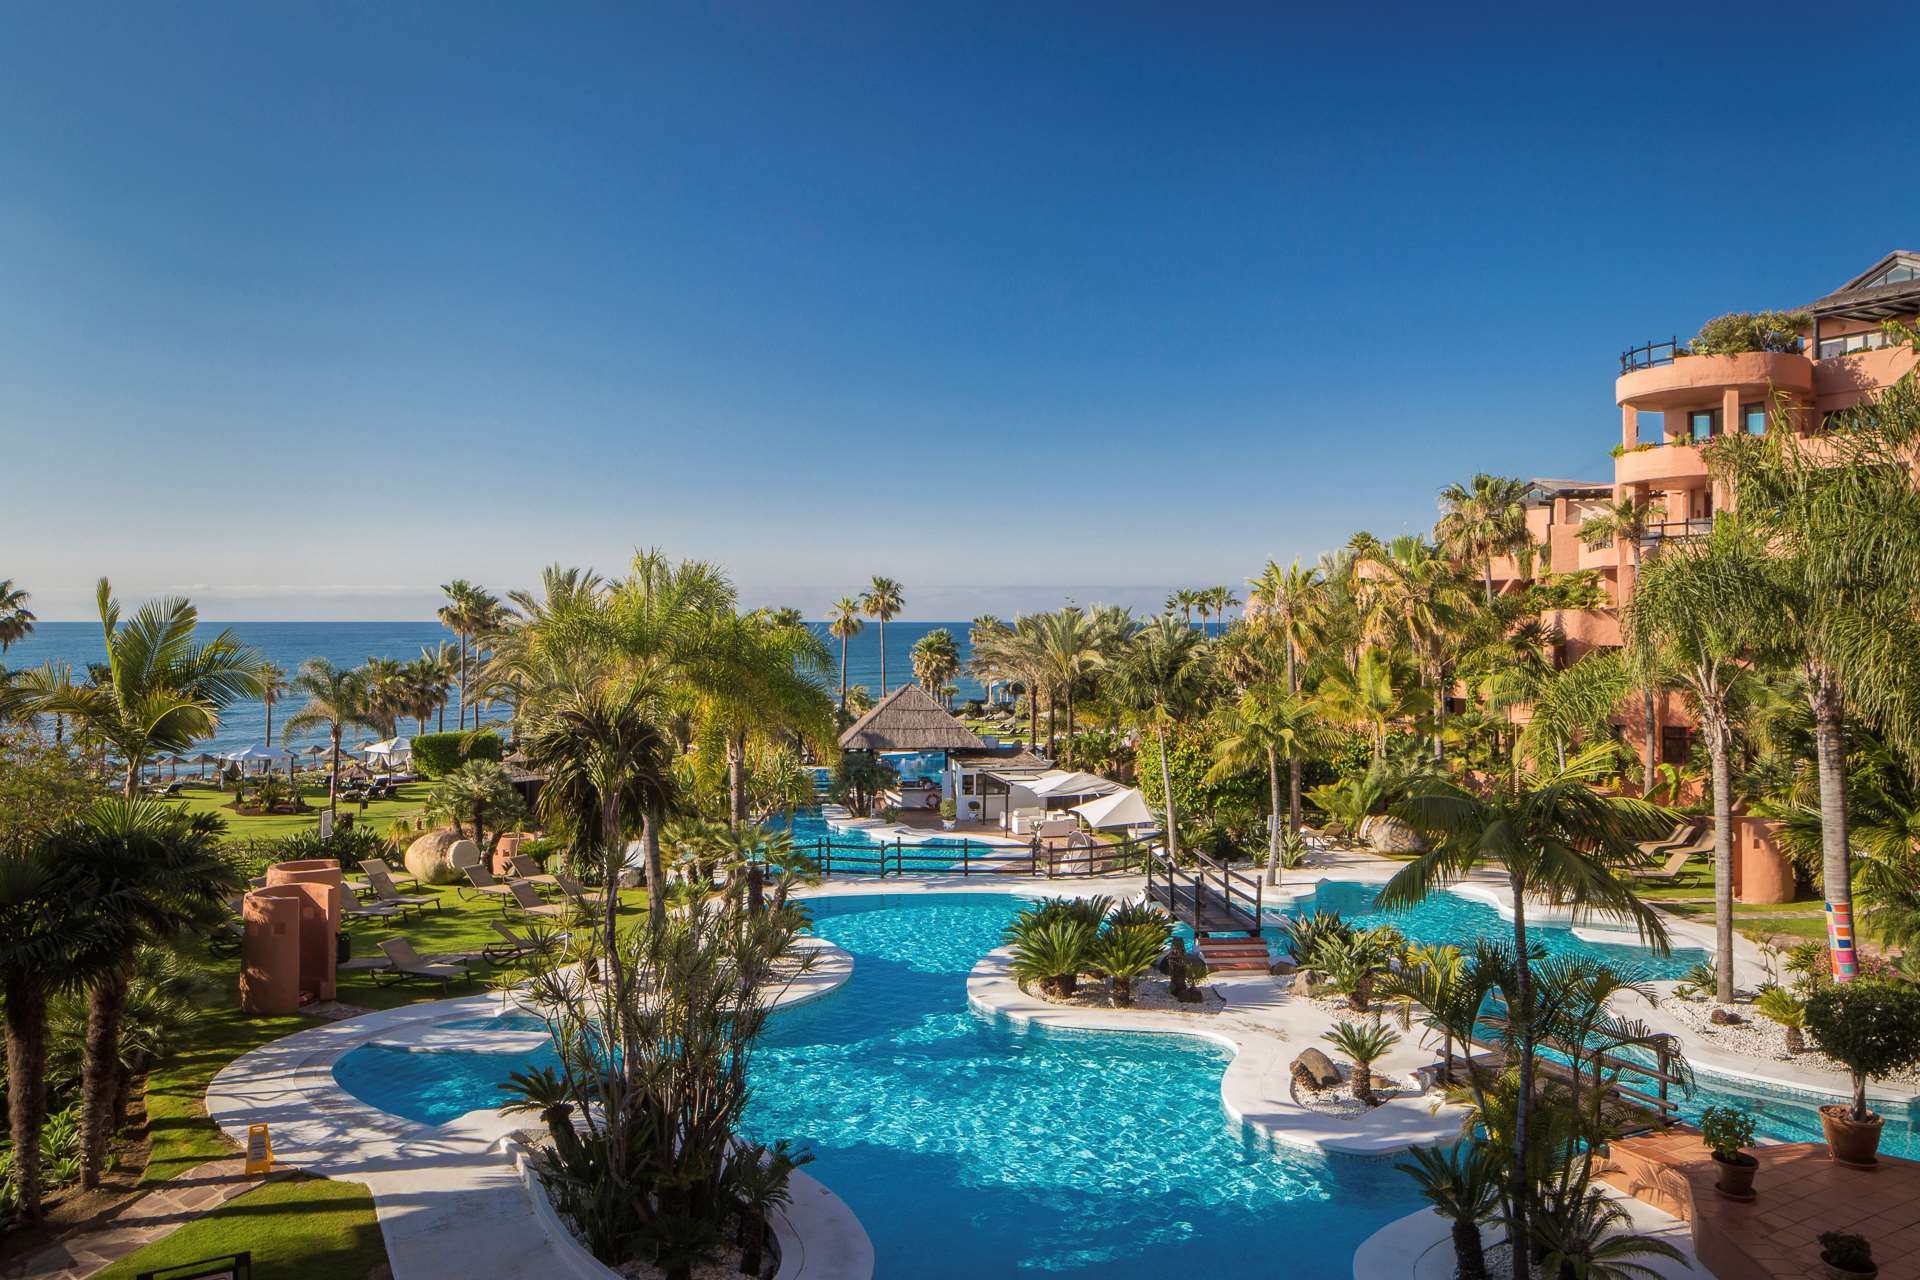 The best Marbella hotels for 2023